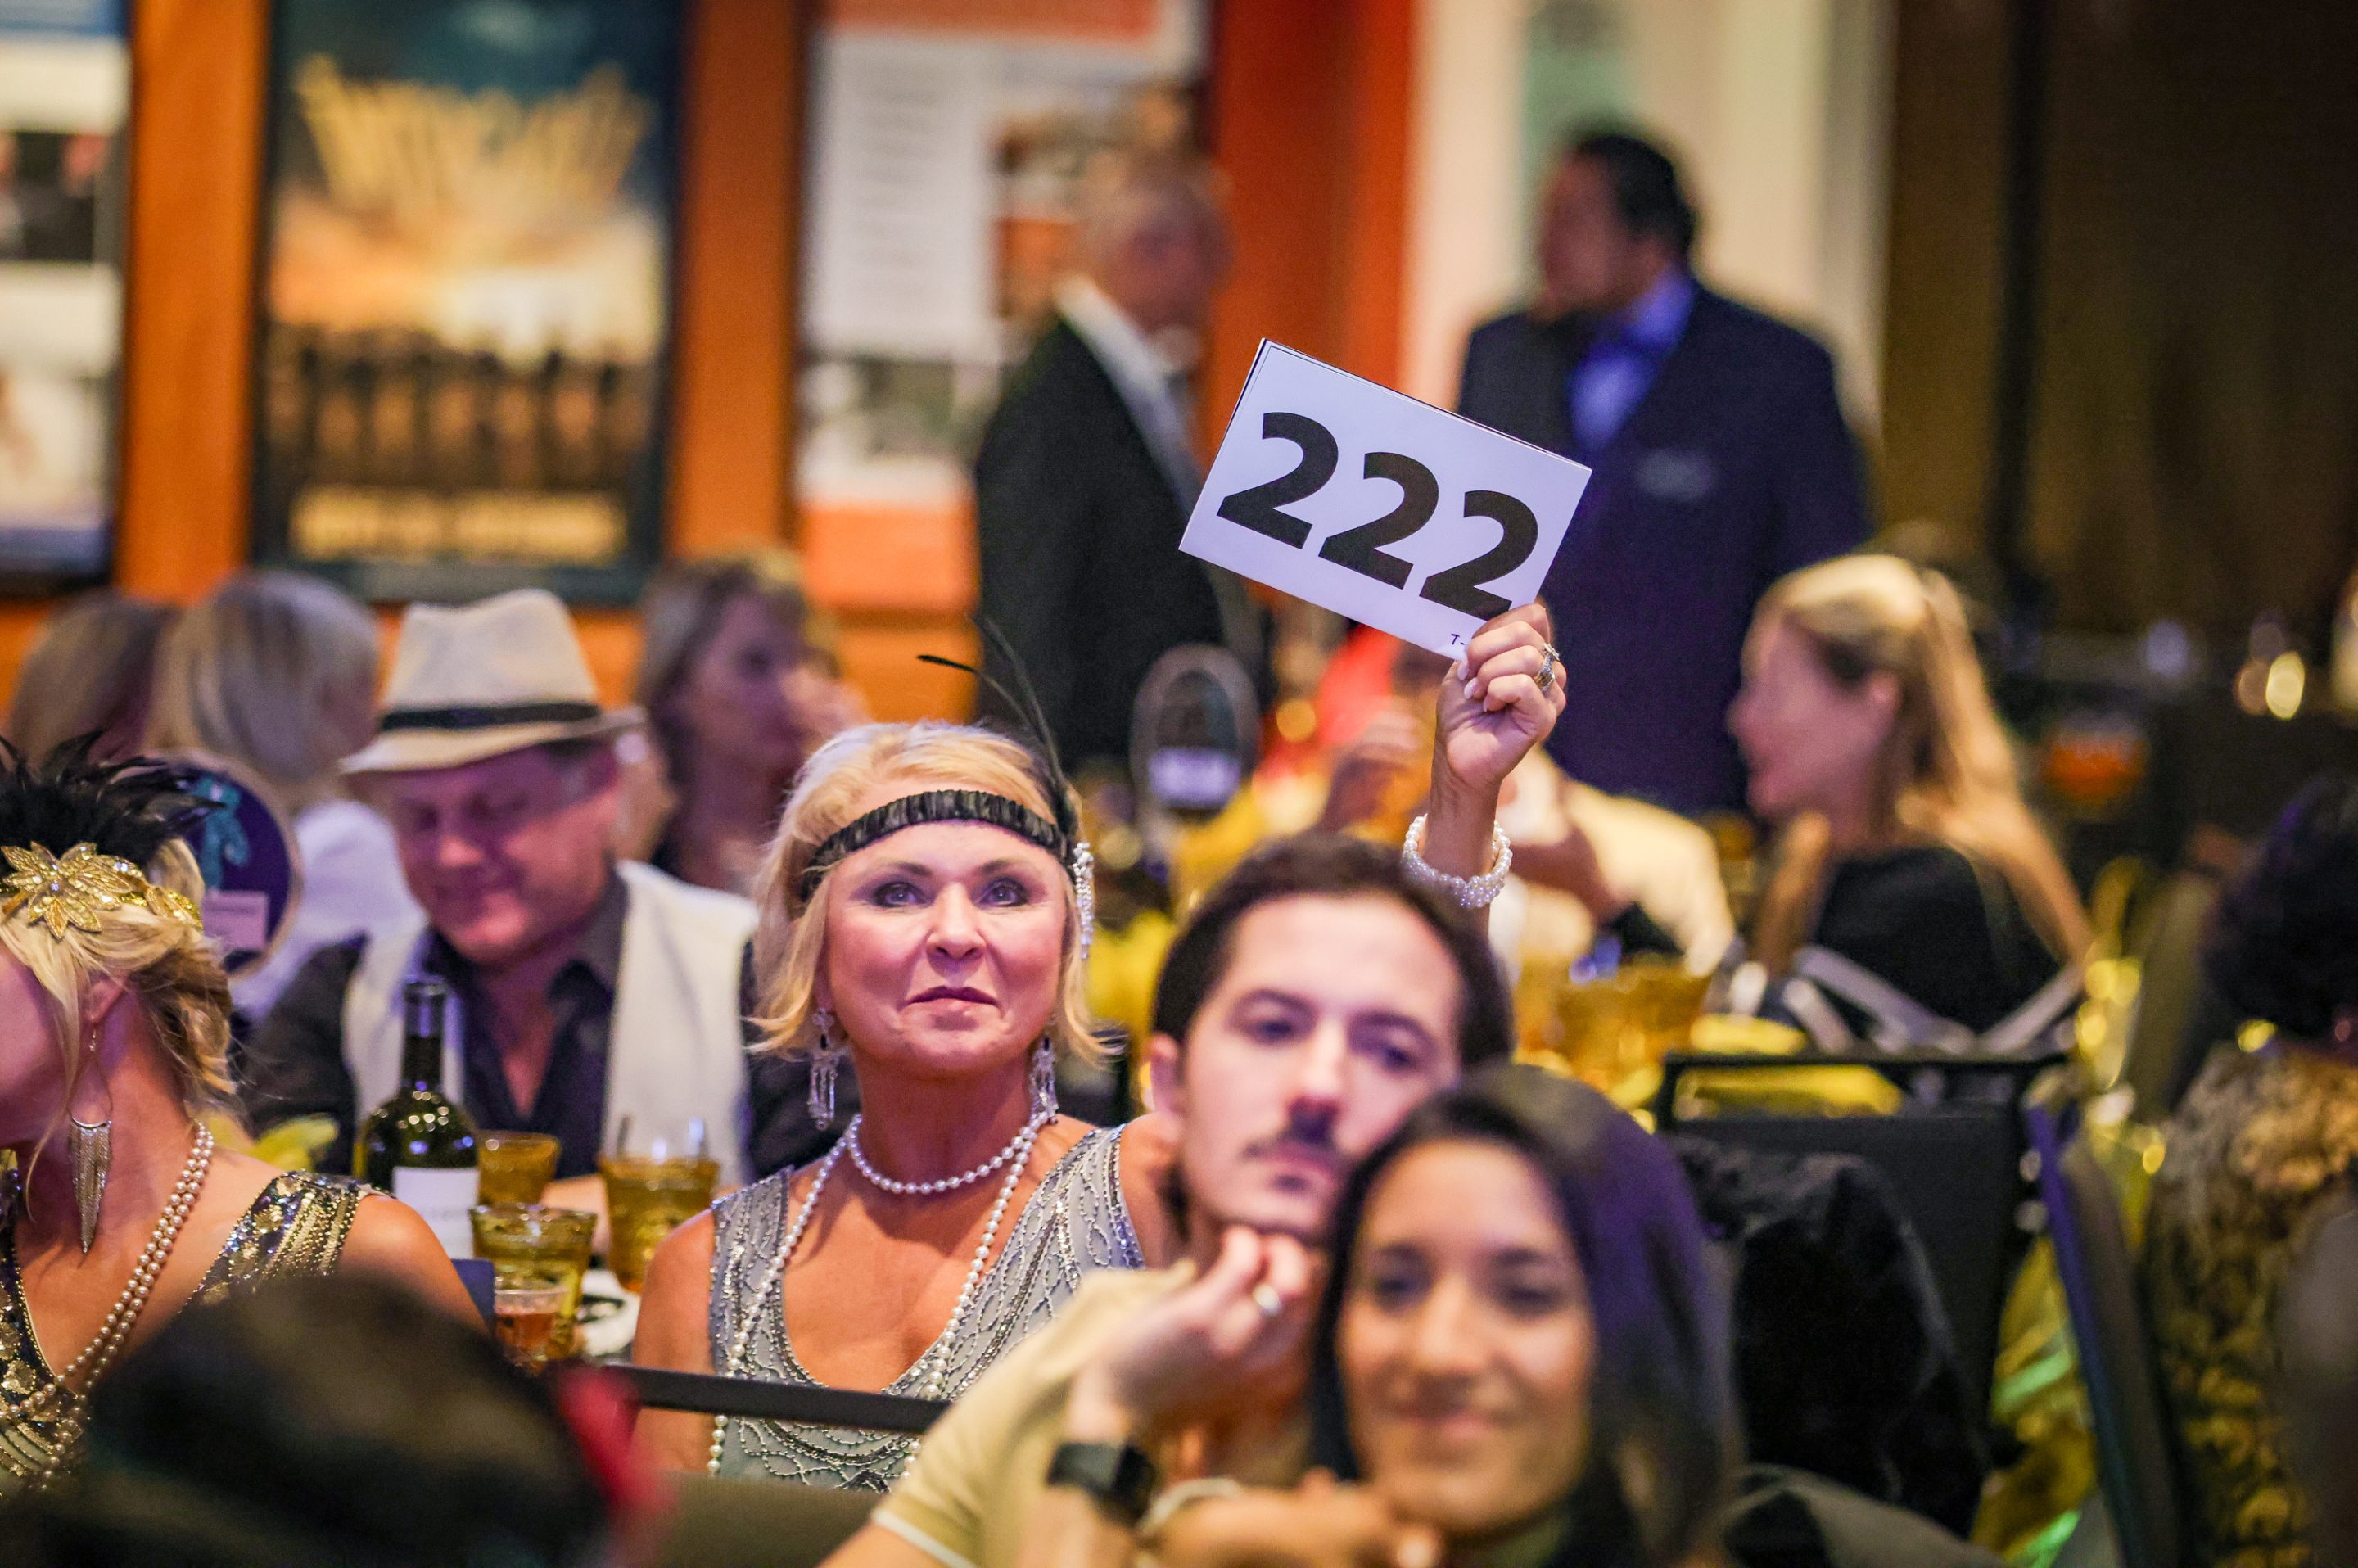 A group of people from a non-profit organization holding up a number at an event.